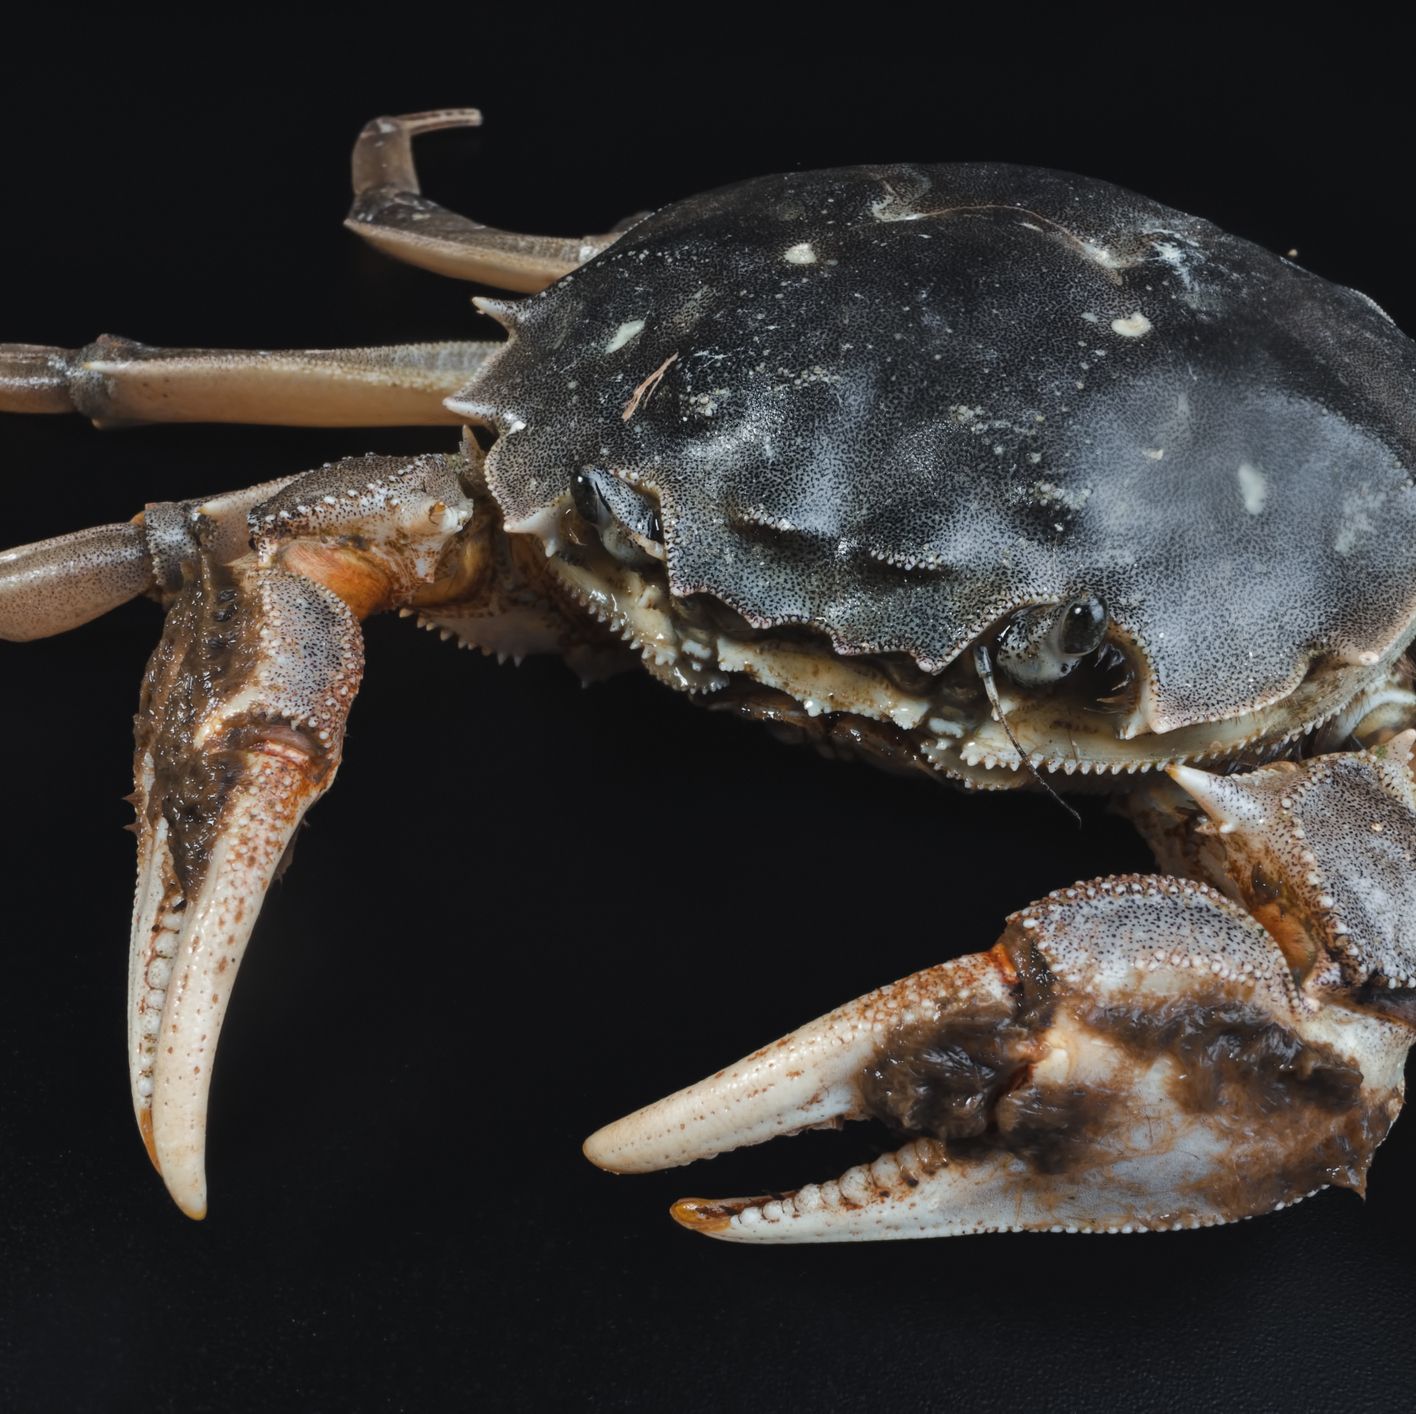 How Crabs Could Help Sustainably Replace Lithium-Ion Batteries